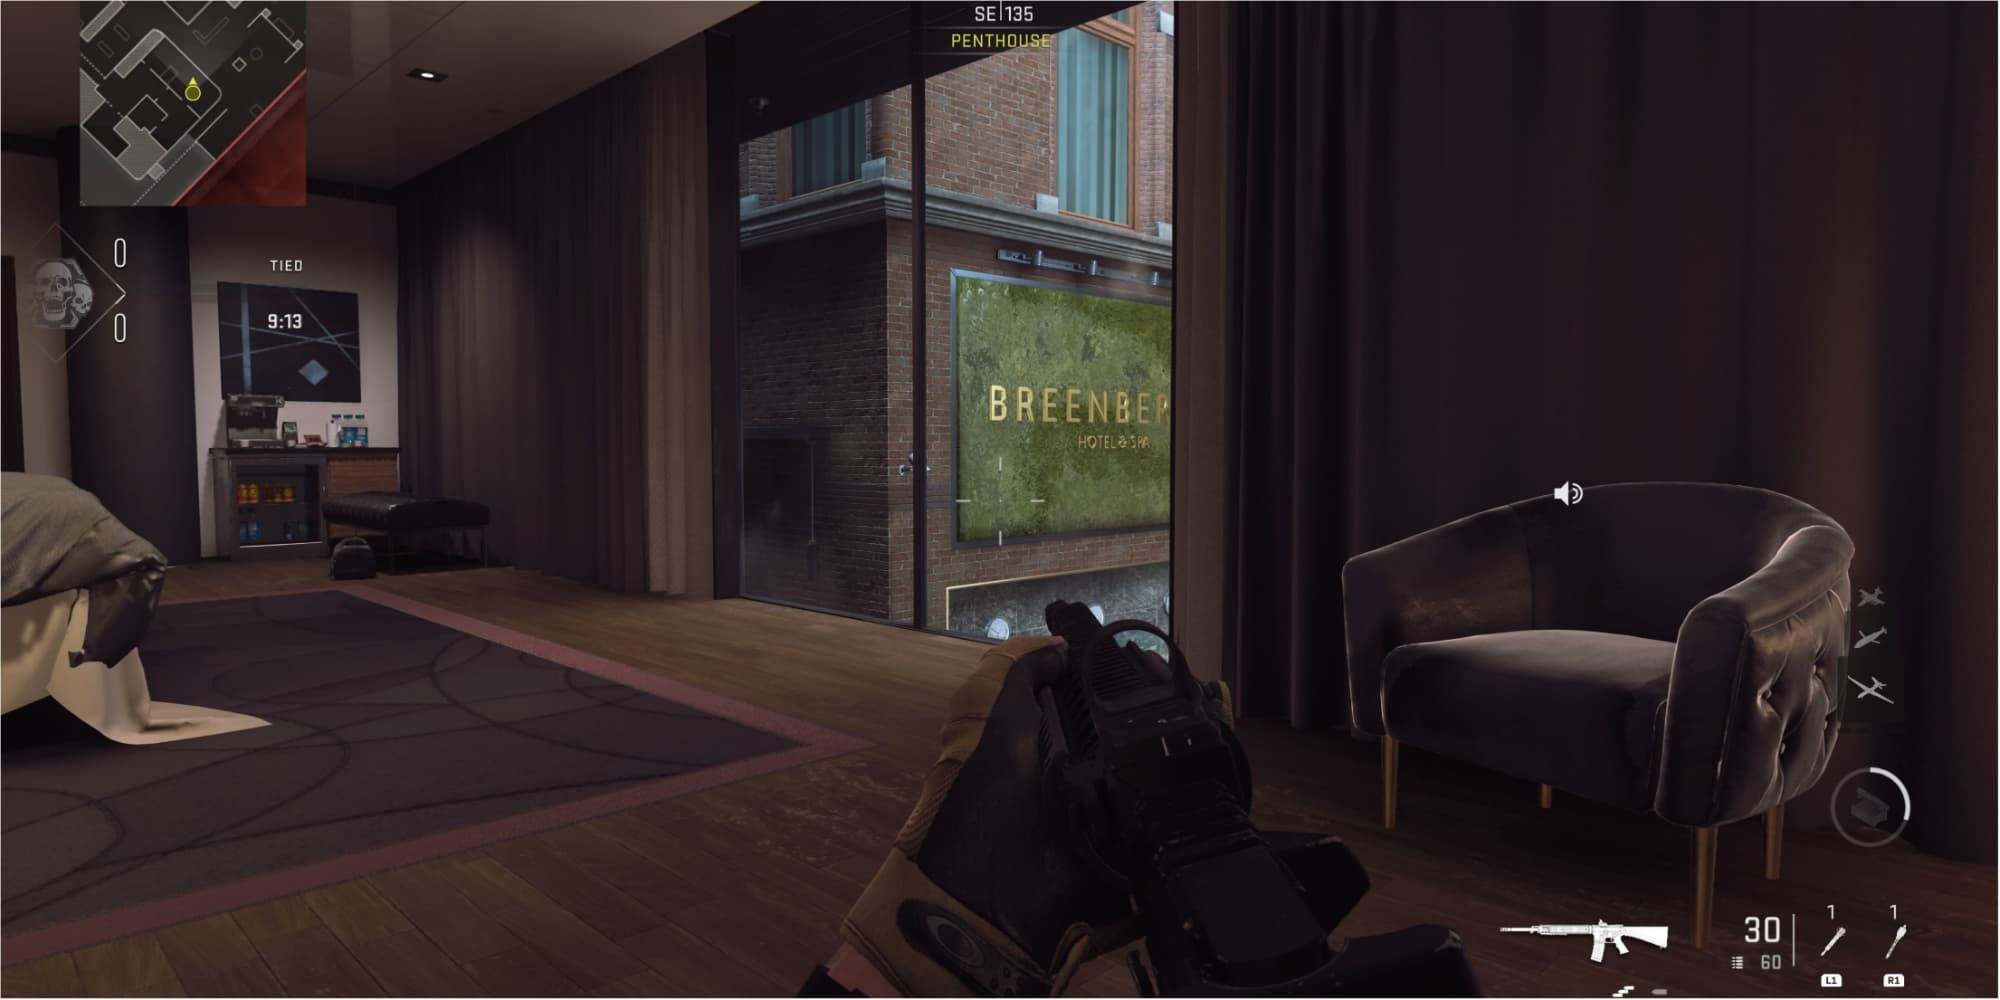 The player peeks out of the window in the Penthouse area of the Breenbergh Hotel map in Call of Duty: Modern Warfare 2